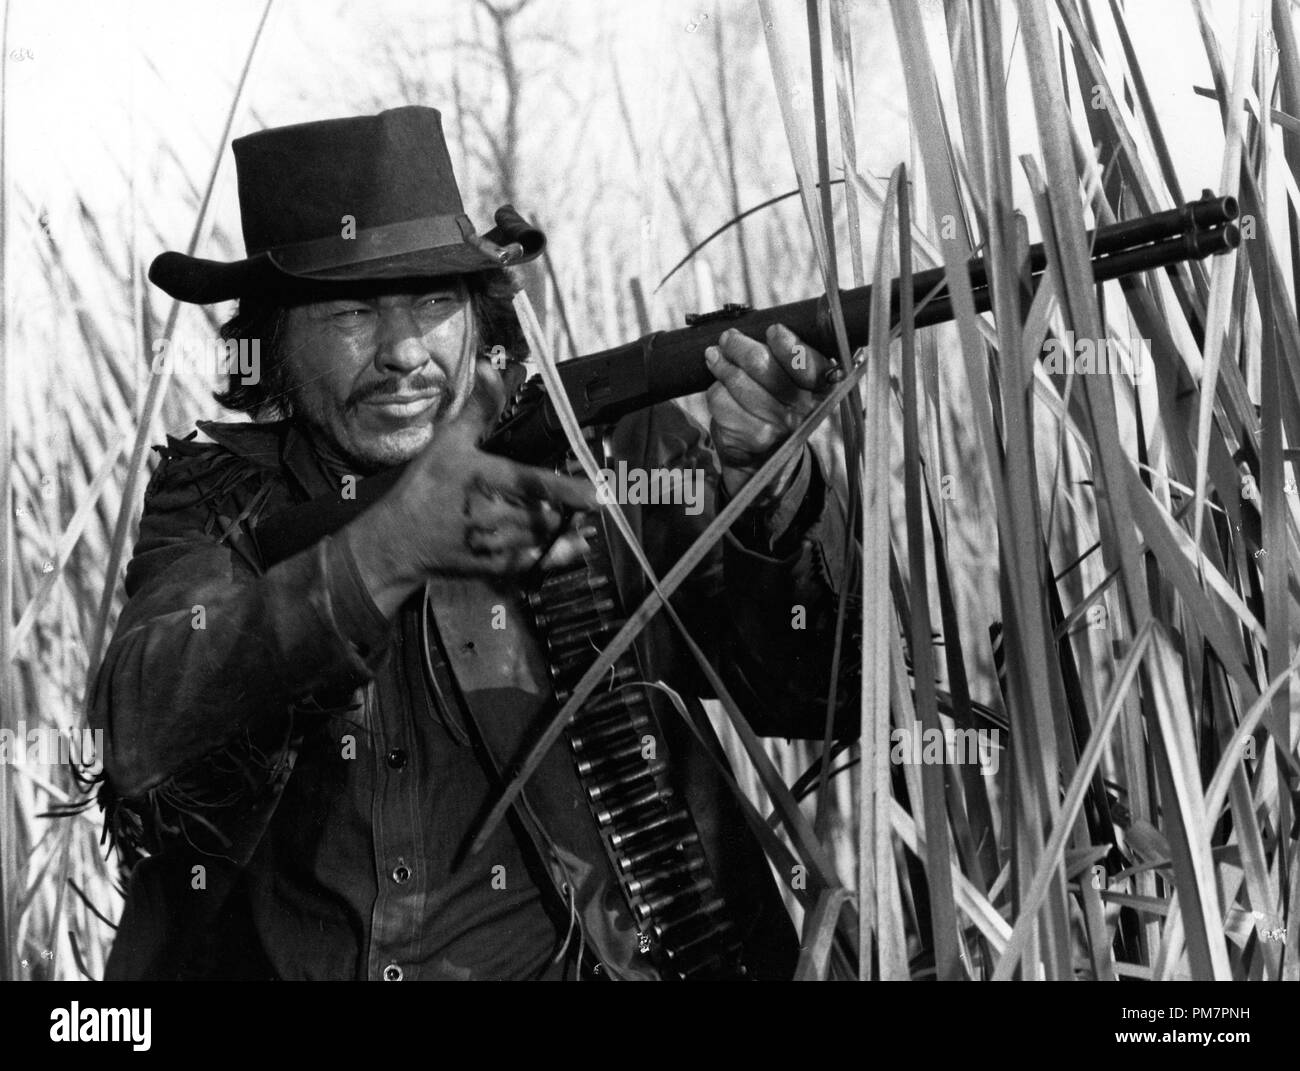 Studio Publicity Still: 'Red Sun' (aka 'Soleil rouge')  Charles Bronson  1971 National General      File Reference # 31386 1020THA Stock Photo